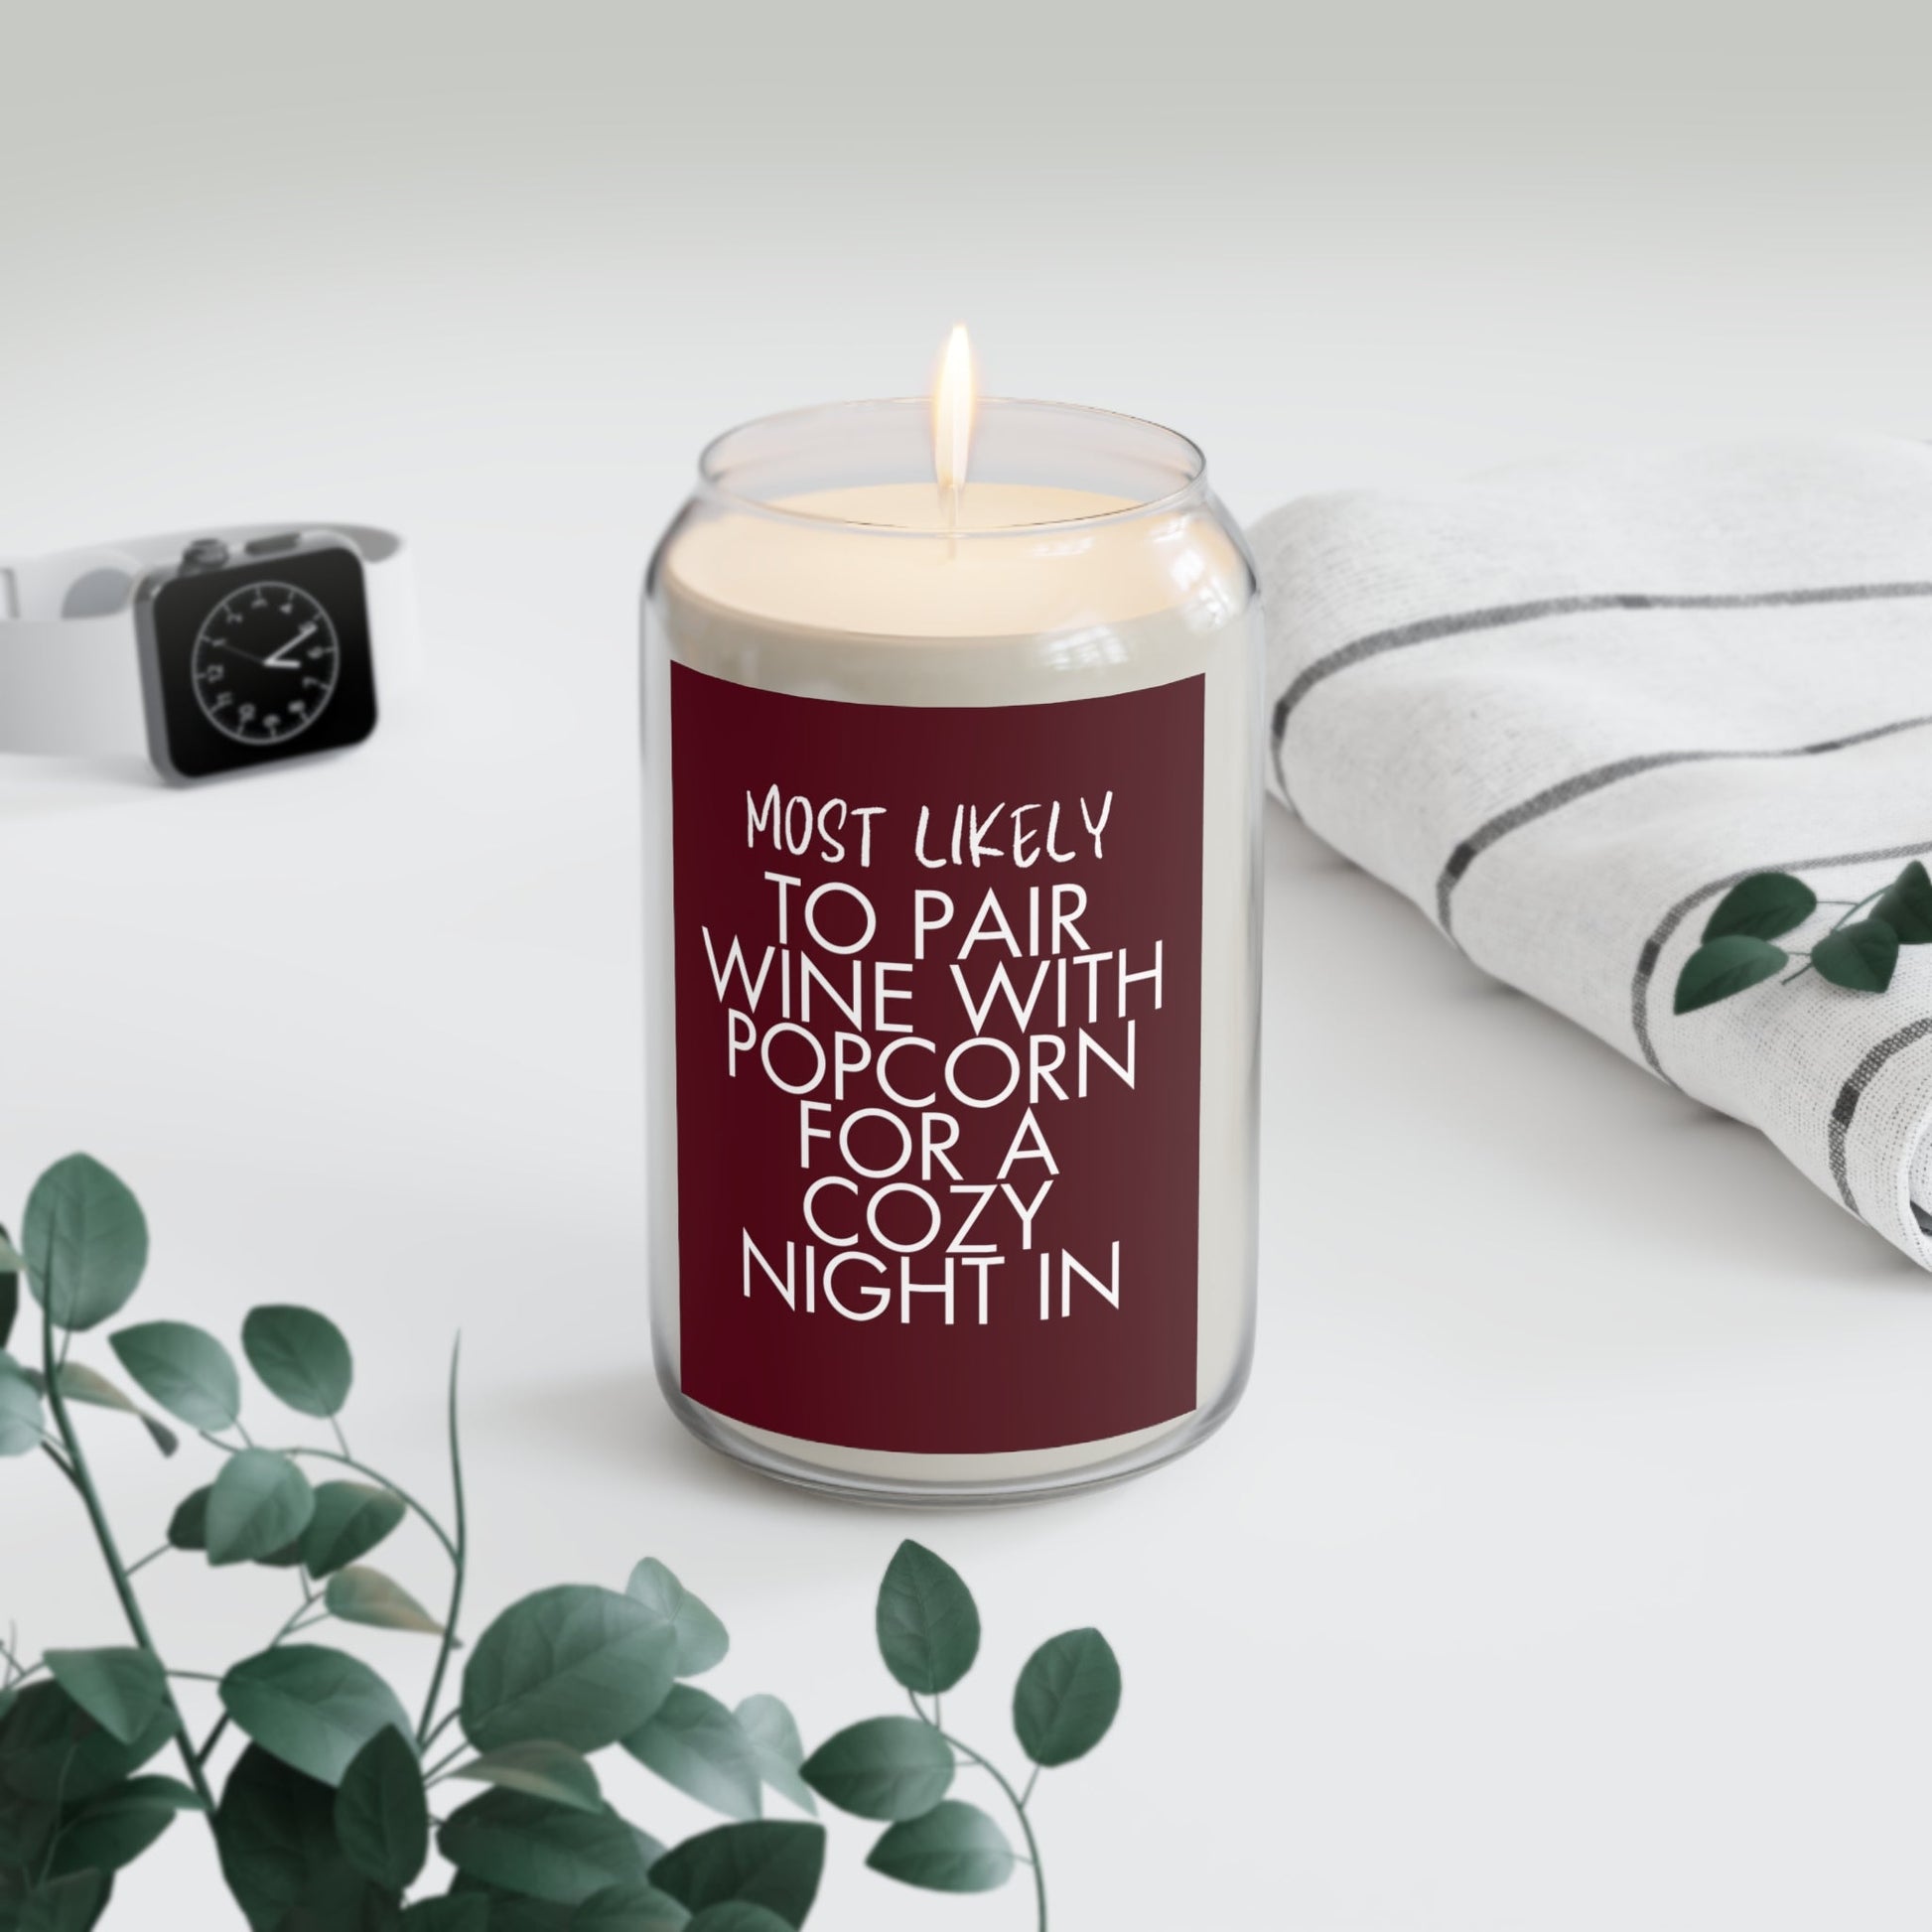 A Cozy Night In Candle - Home Decor